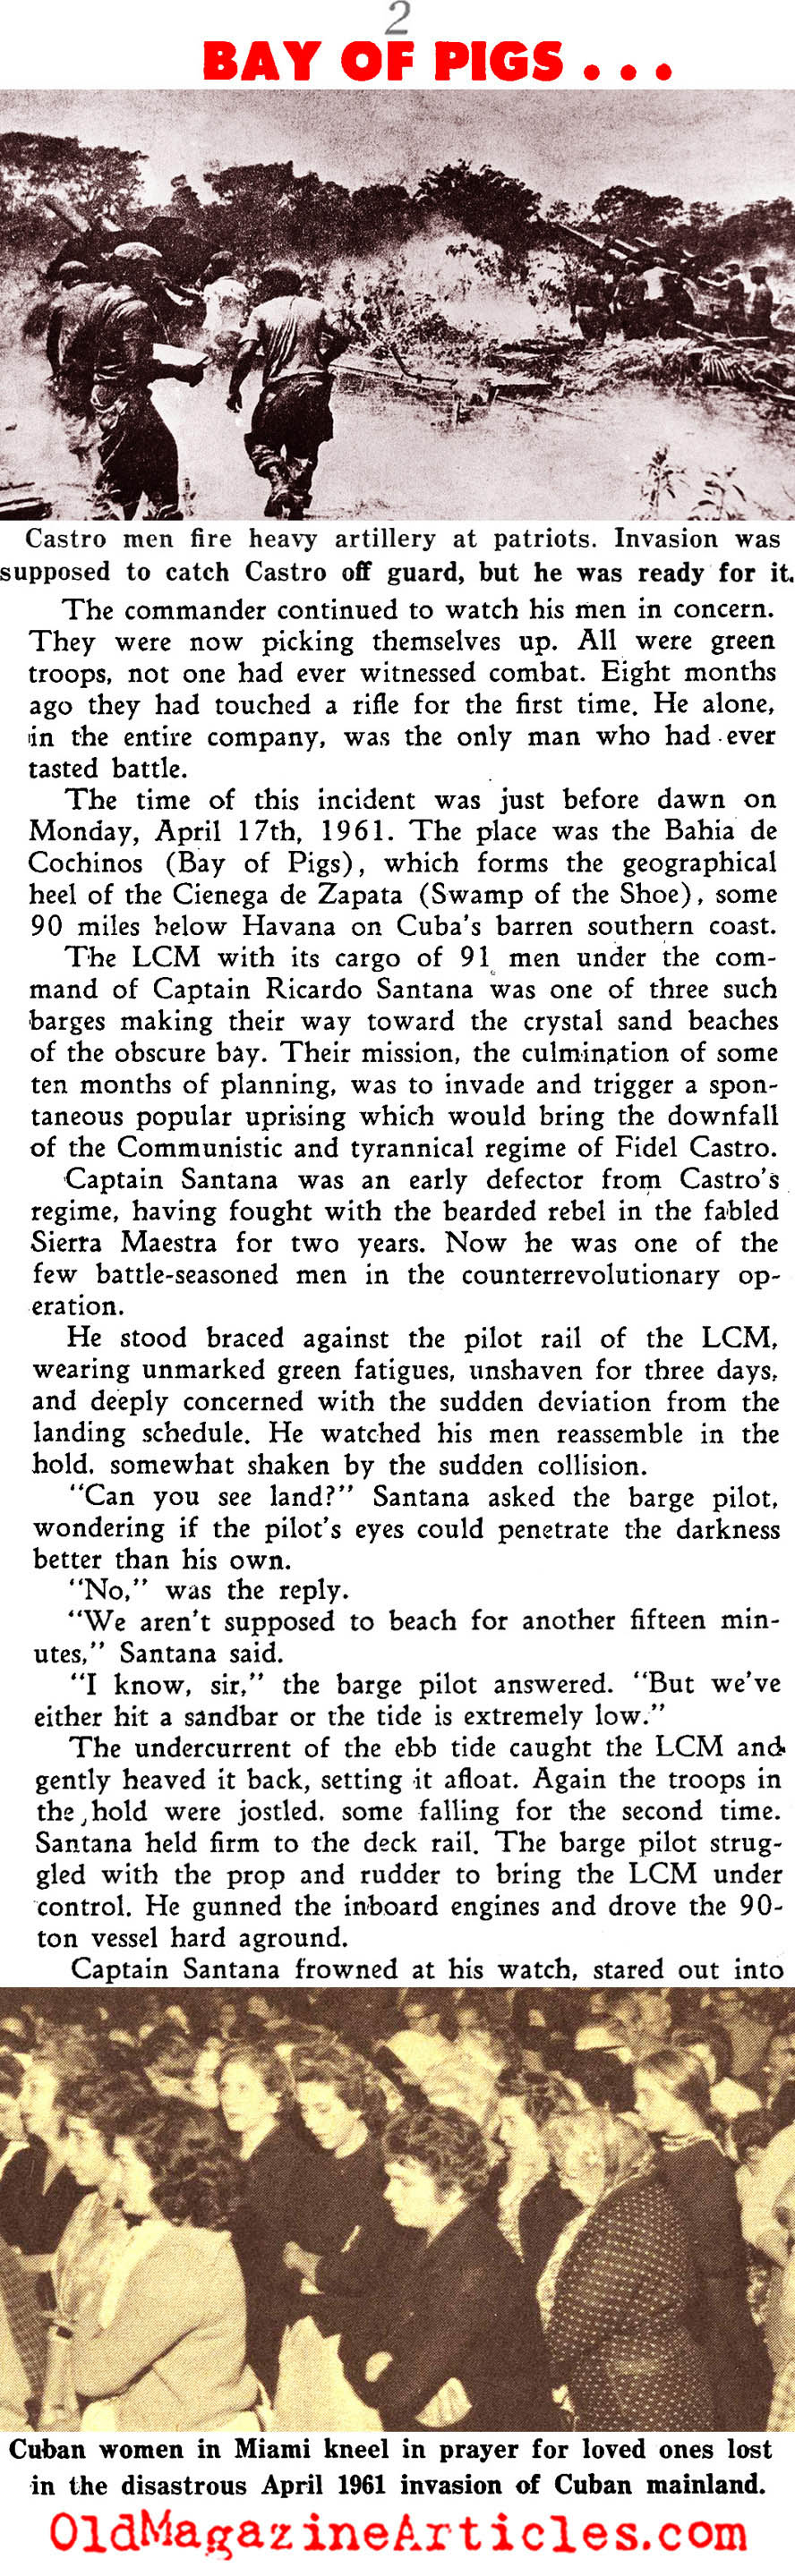 Disaster at the Bay of Pigs (Sir! Magazine, 1962)